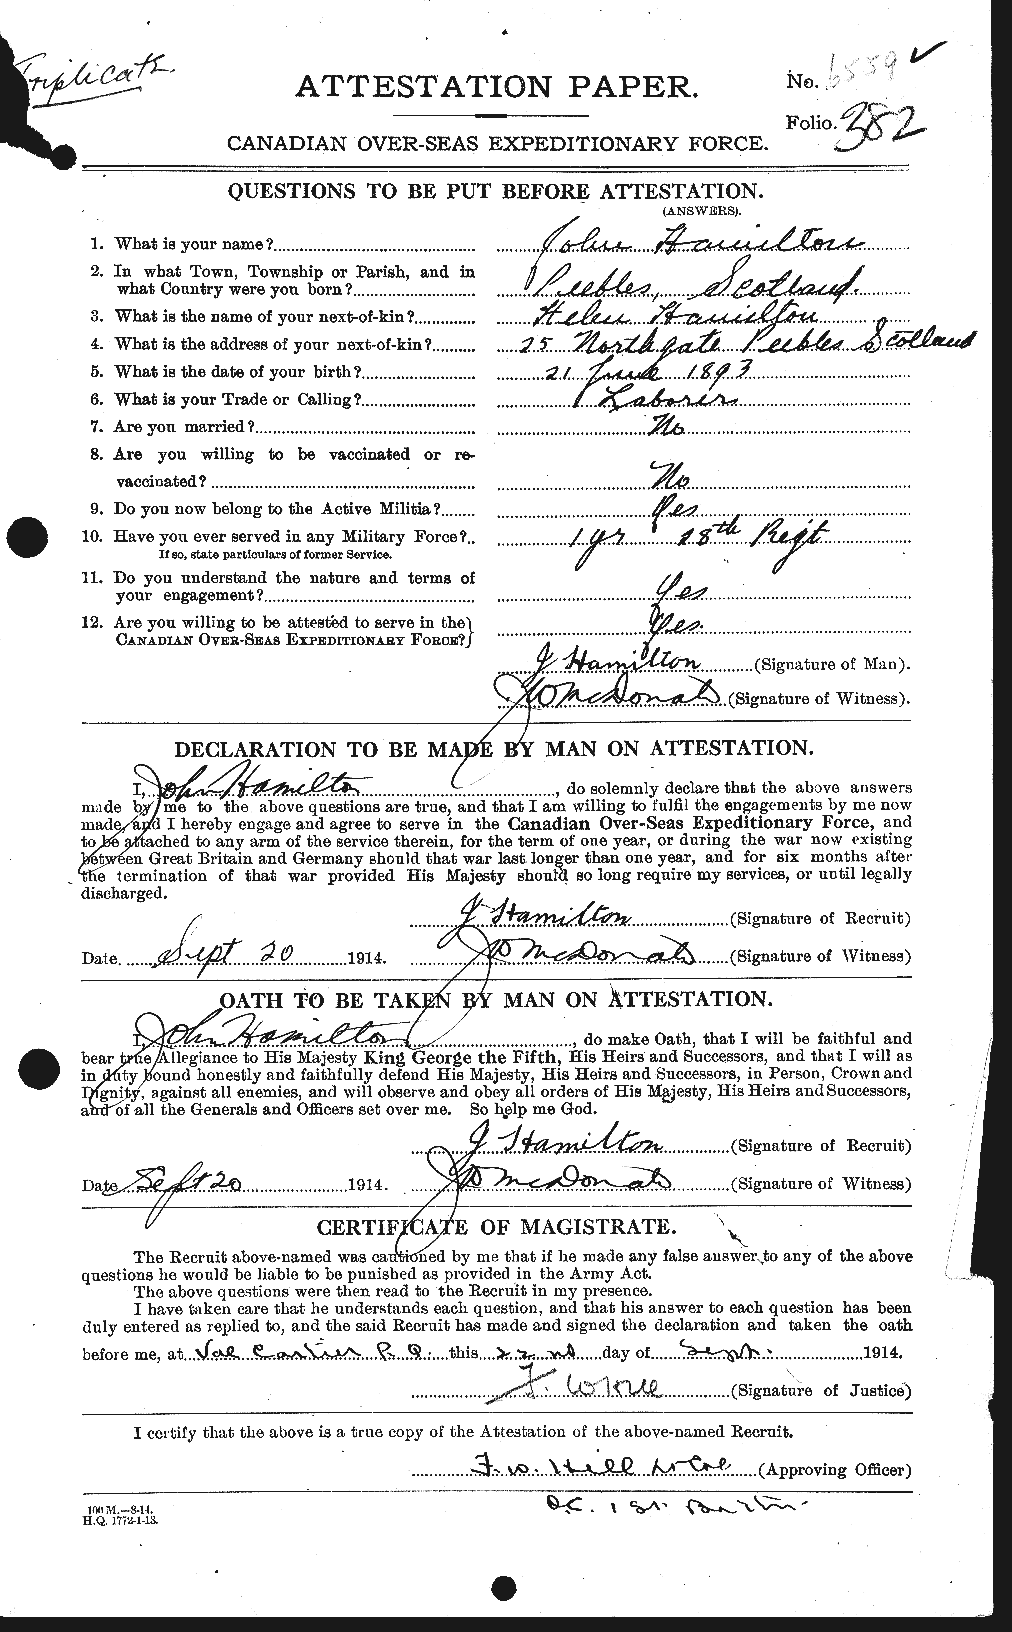 Personnel Records of the First World War - CEF 373056a